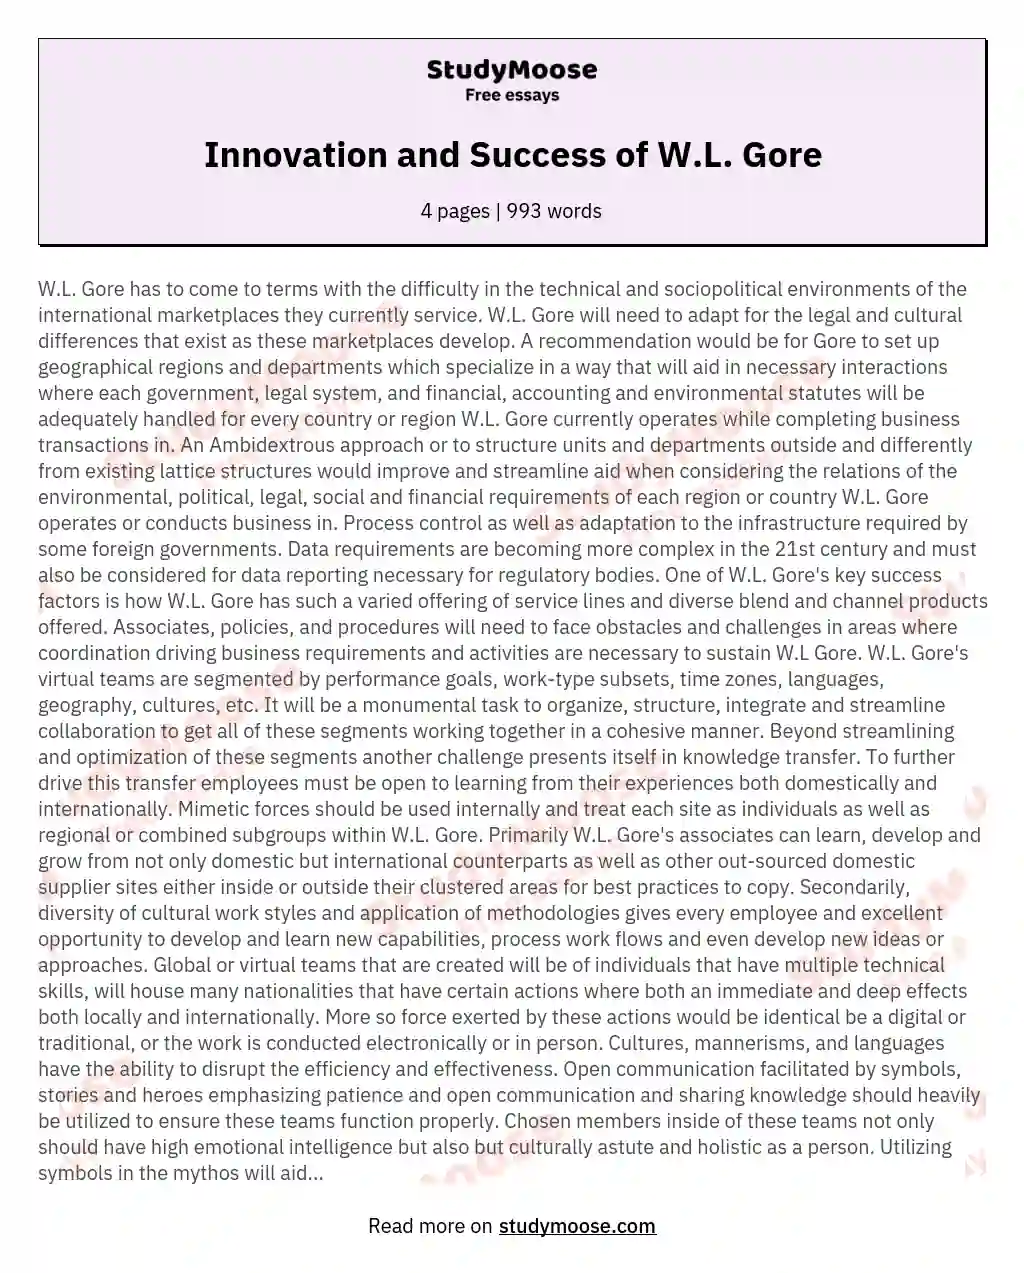 Innovation and Success of W.L. Gore essay